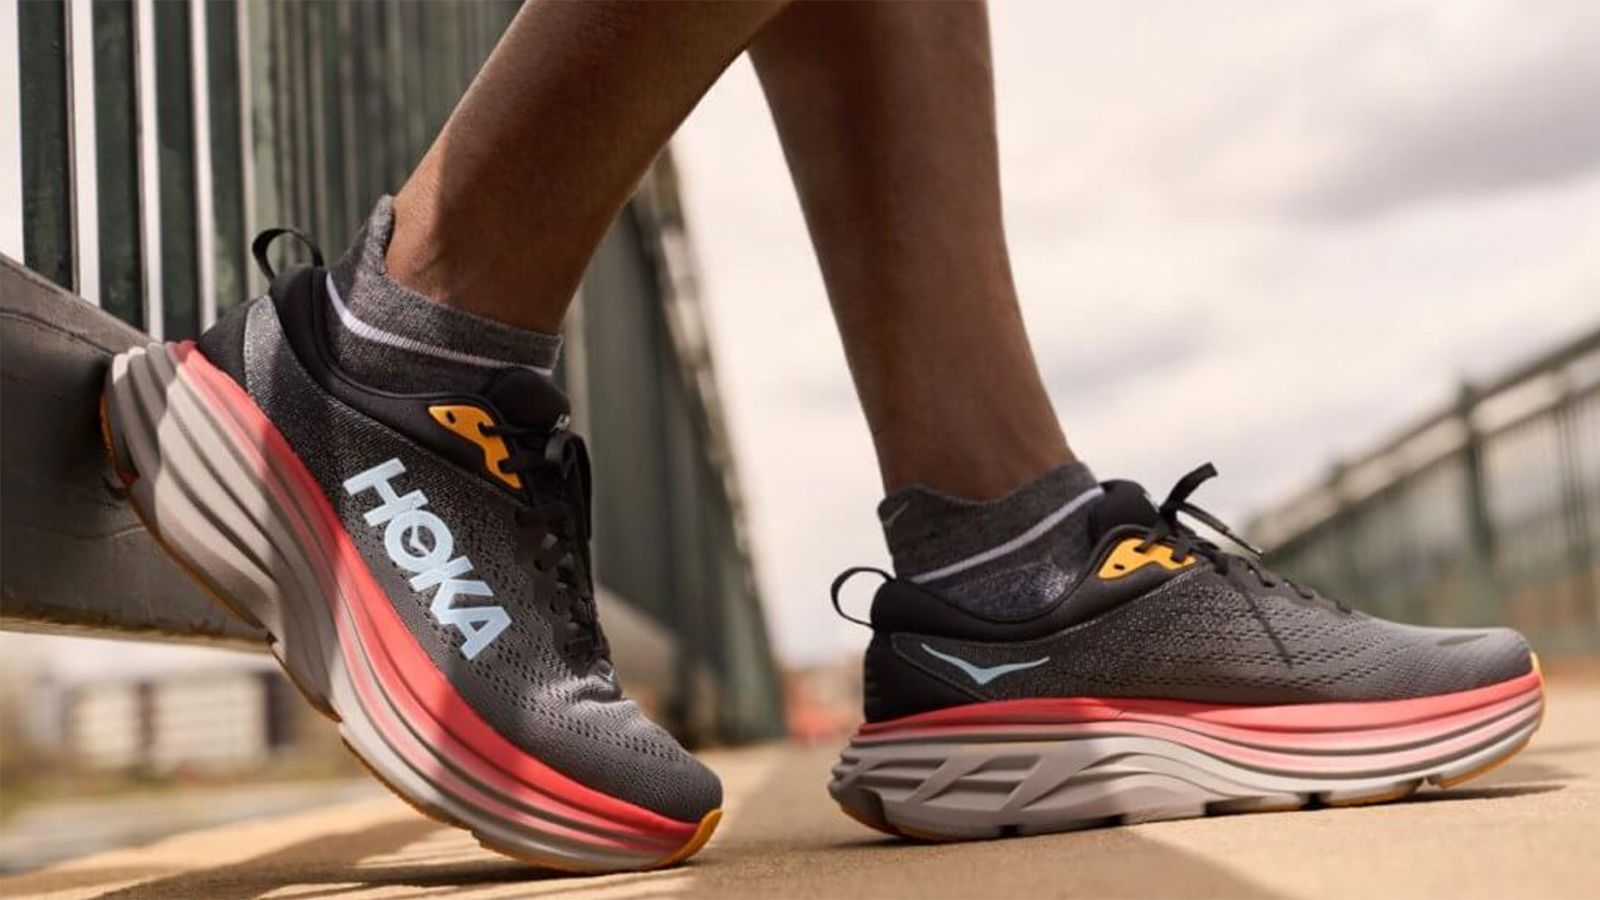 These Under Armour Running Shoes Are Ideal For Any Runner Out There - Men's  Journal